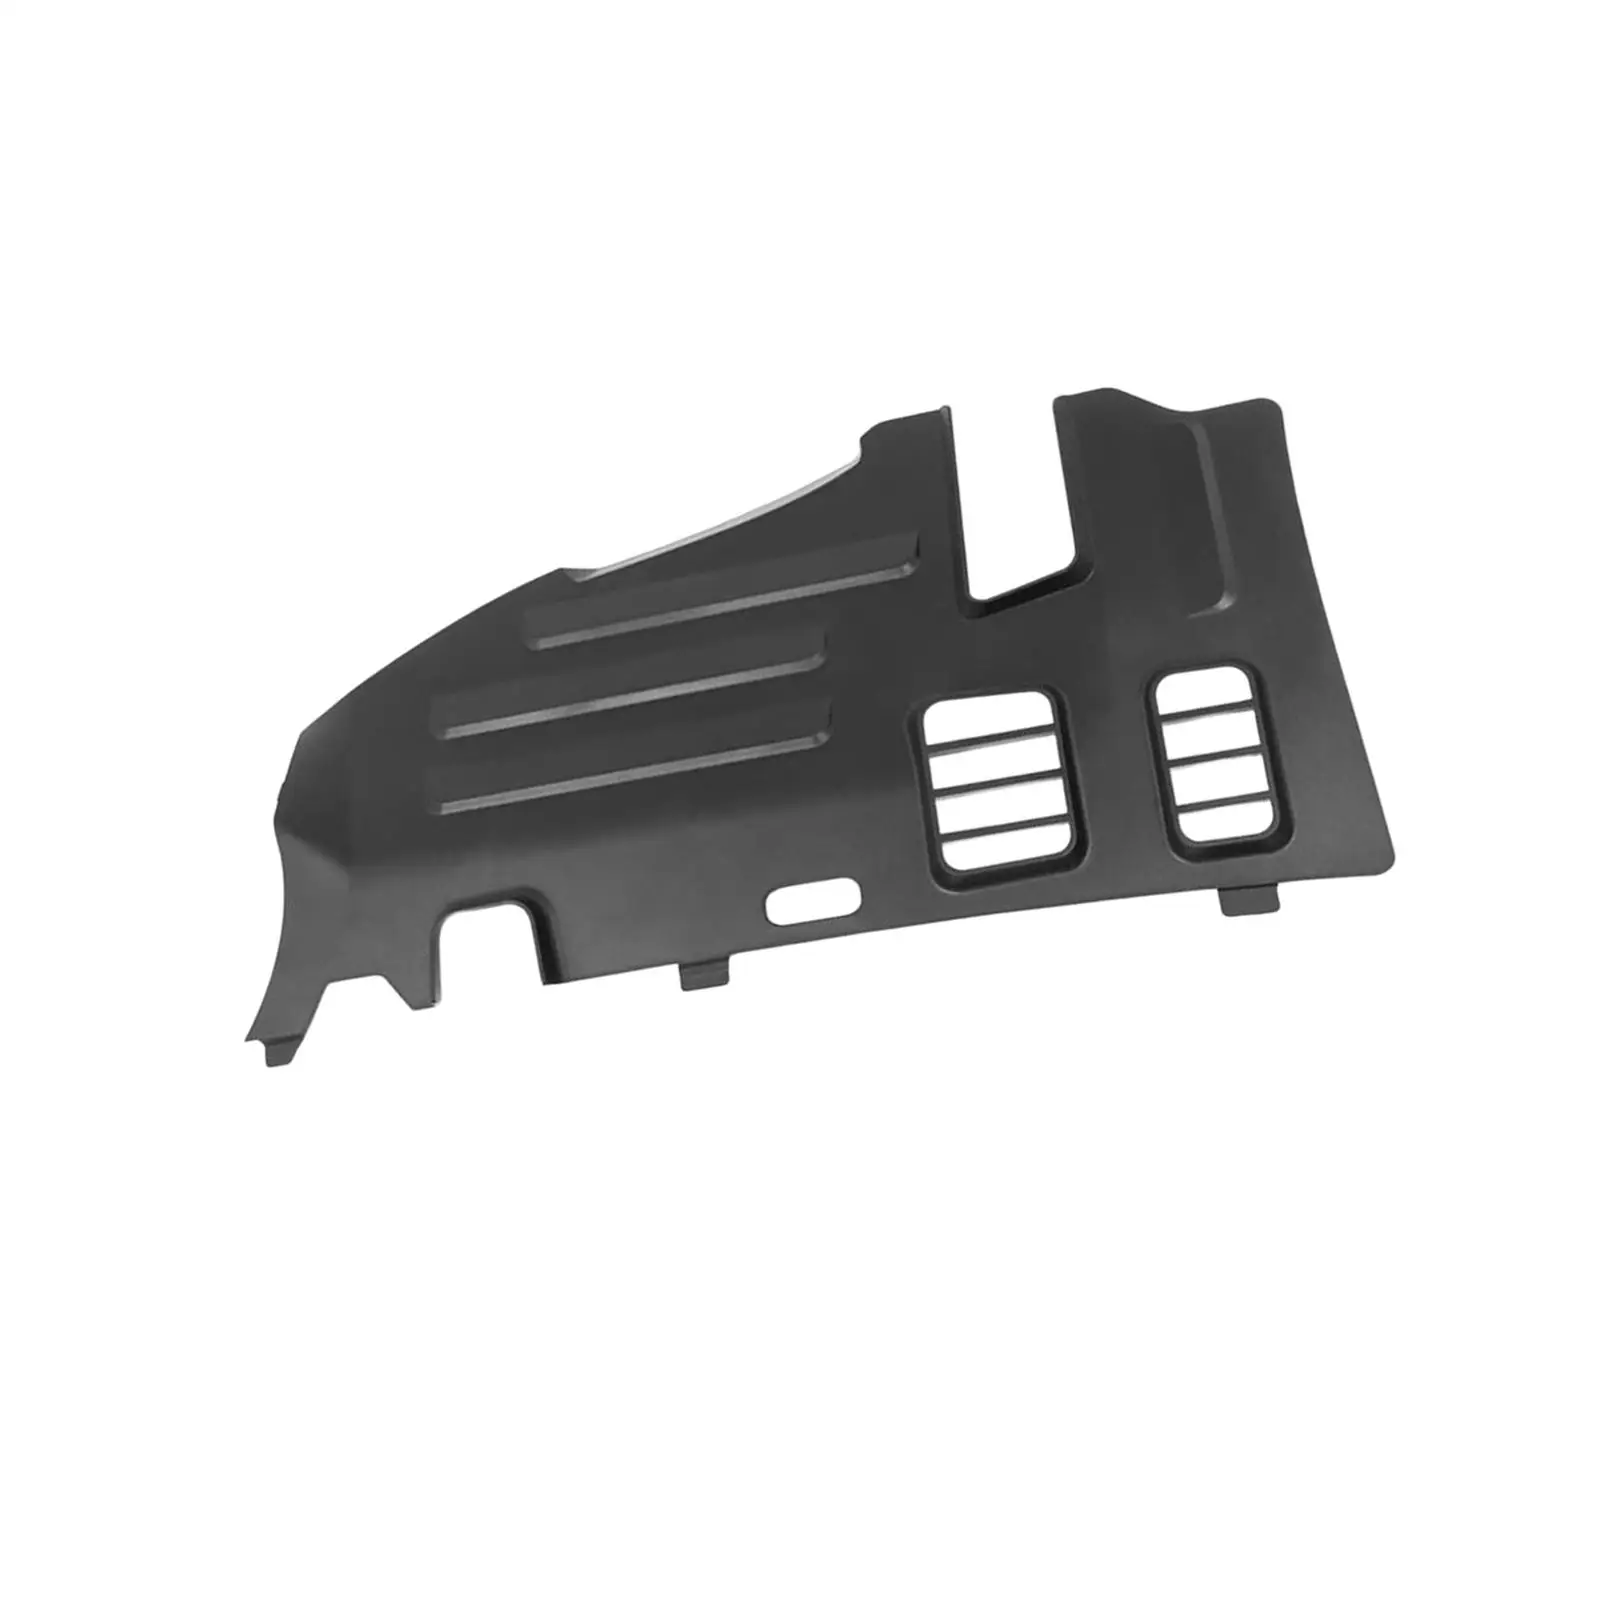 Driver Anti Kick Panel Cover Trim Main Driving Anti Kick Pad for Byd Yuan Plus Replacement High Performance Easy to Install